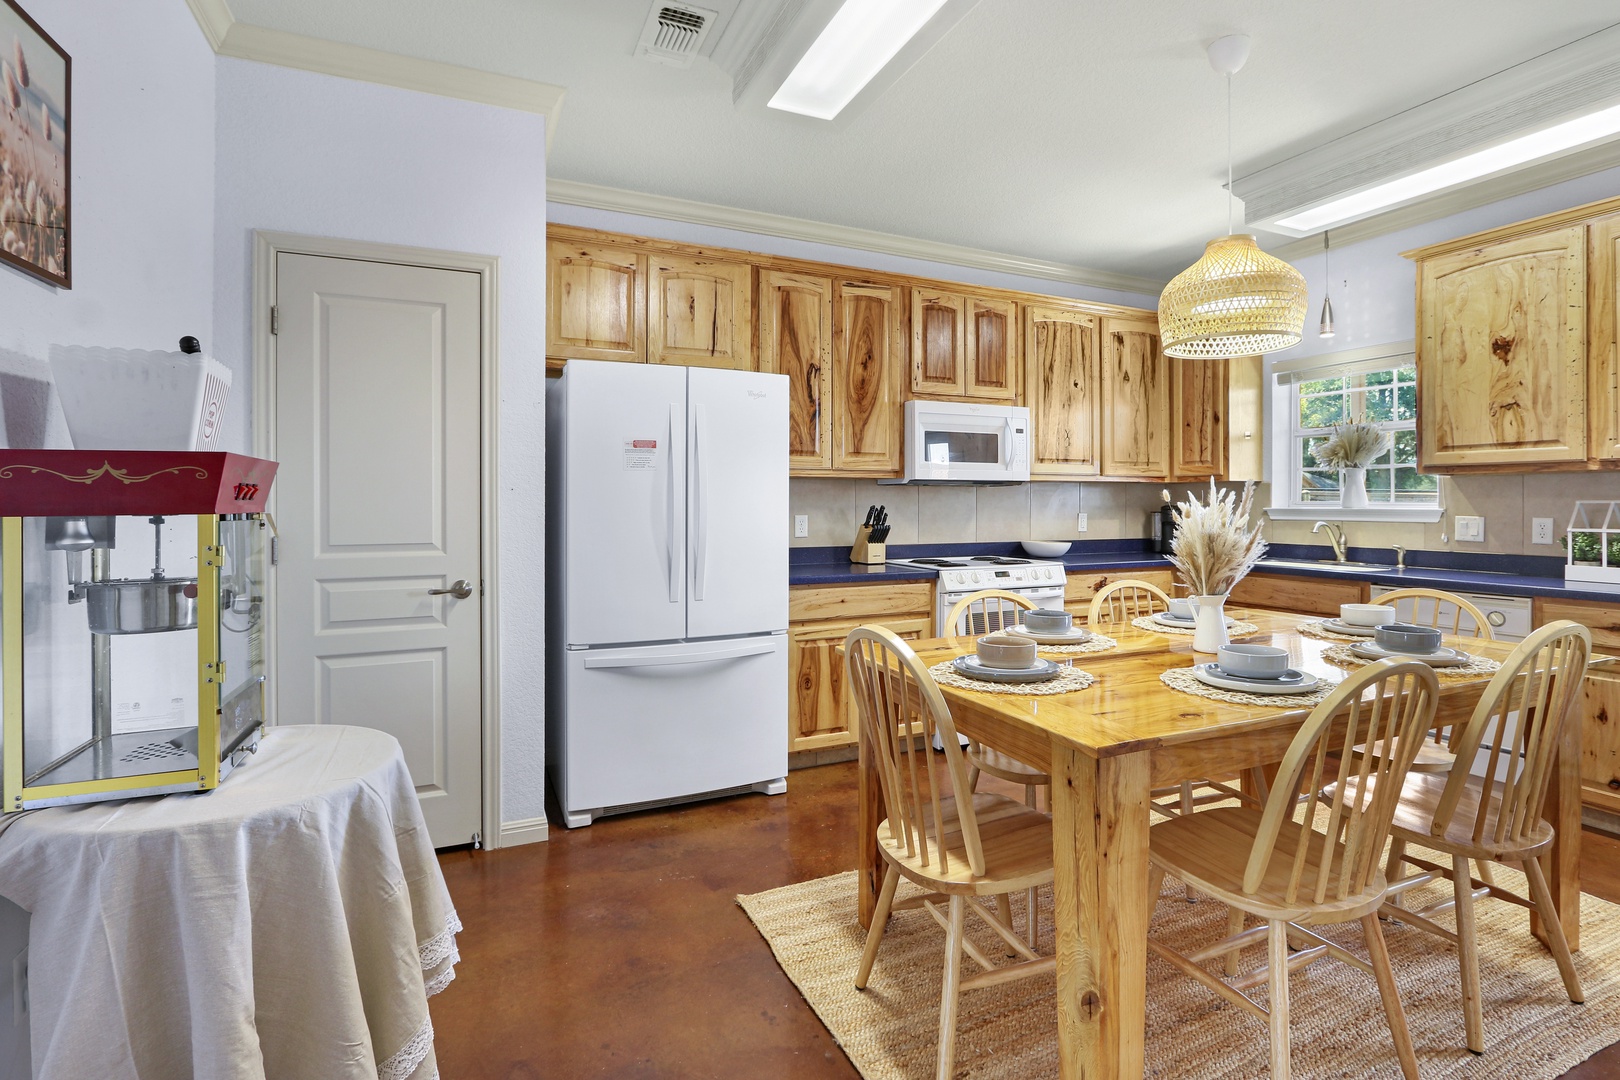 The spacious eat-in kitchen is well equipped for your visit to New Braunfels